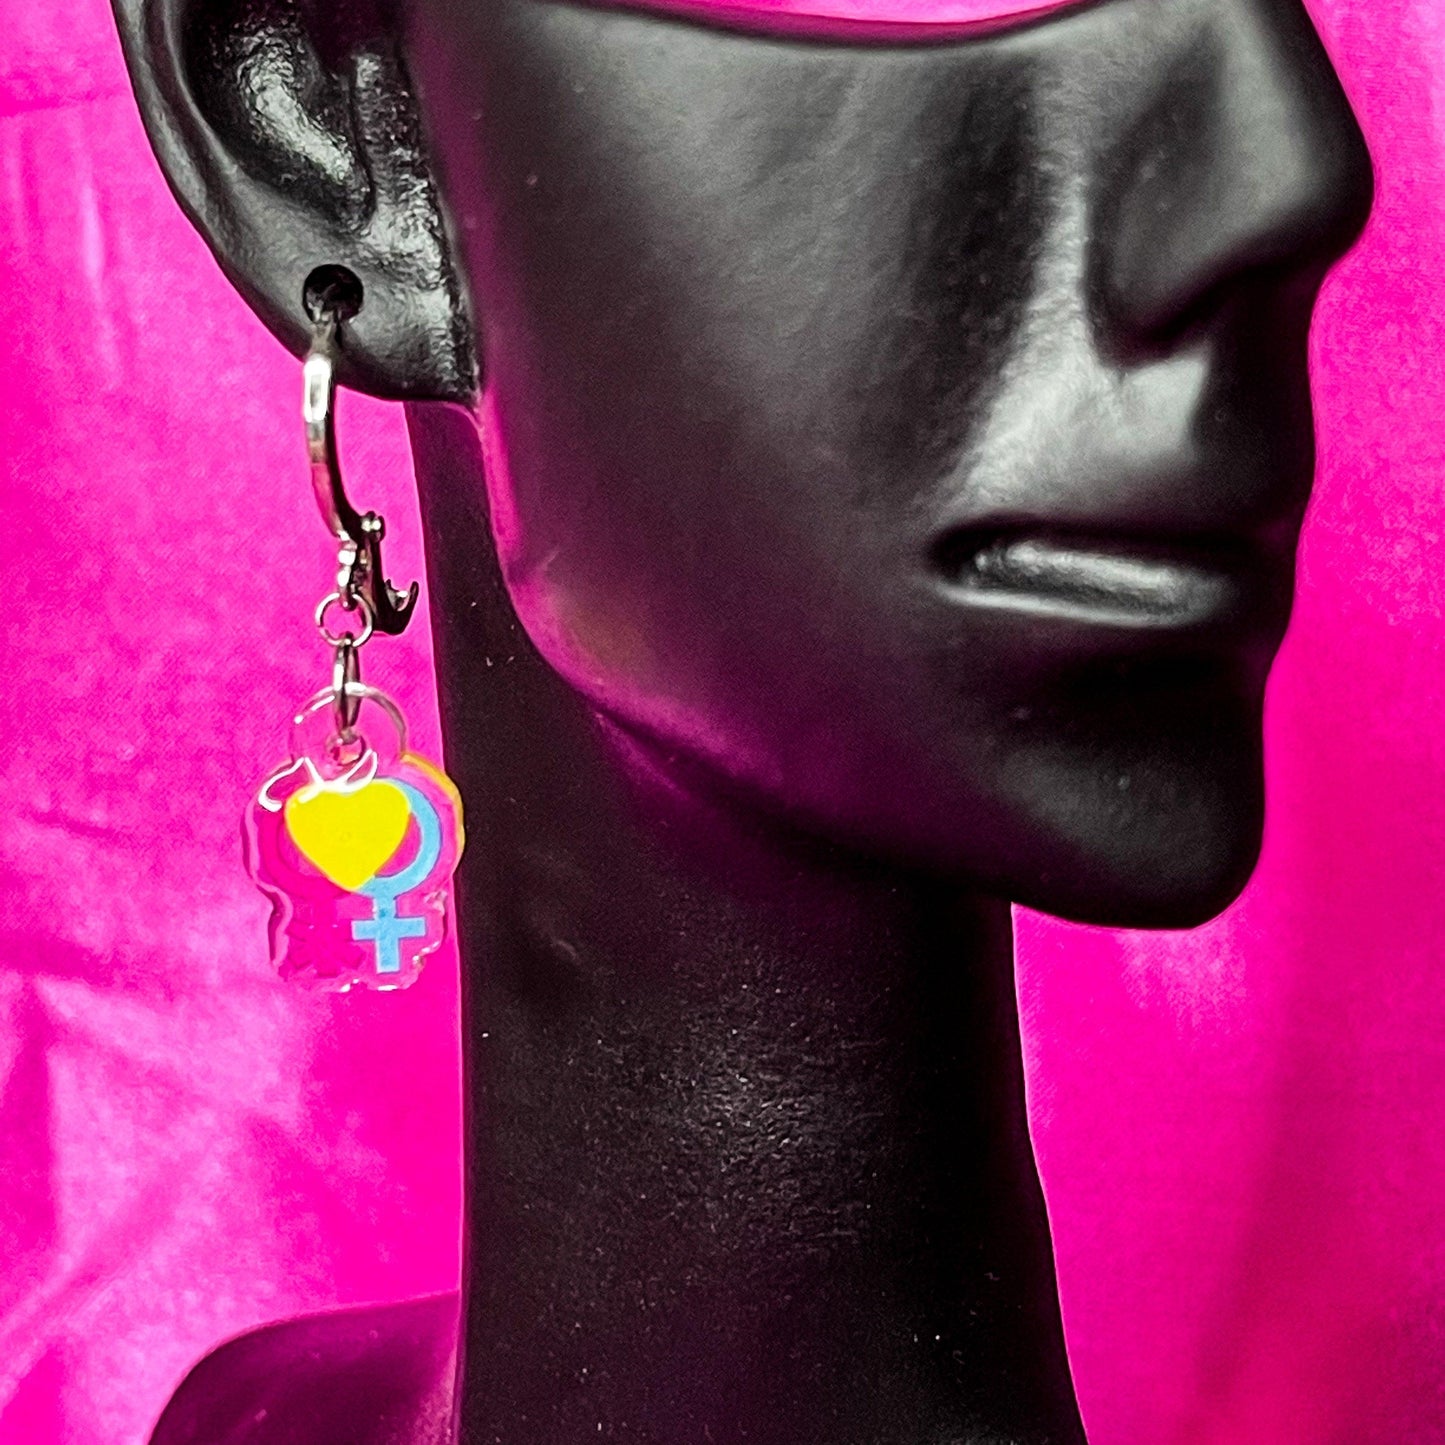 Pansexual Pride Flag Inspired Earrings - Lxyclr Authentic